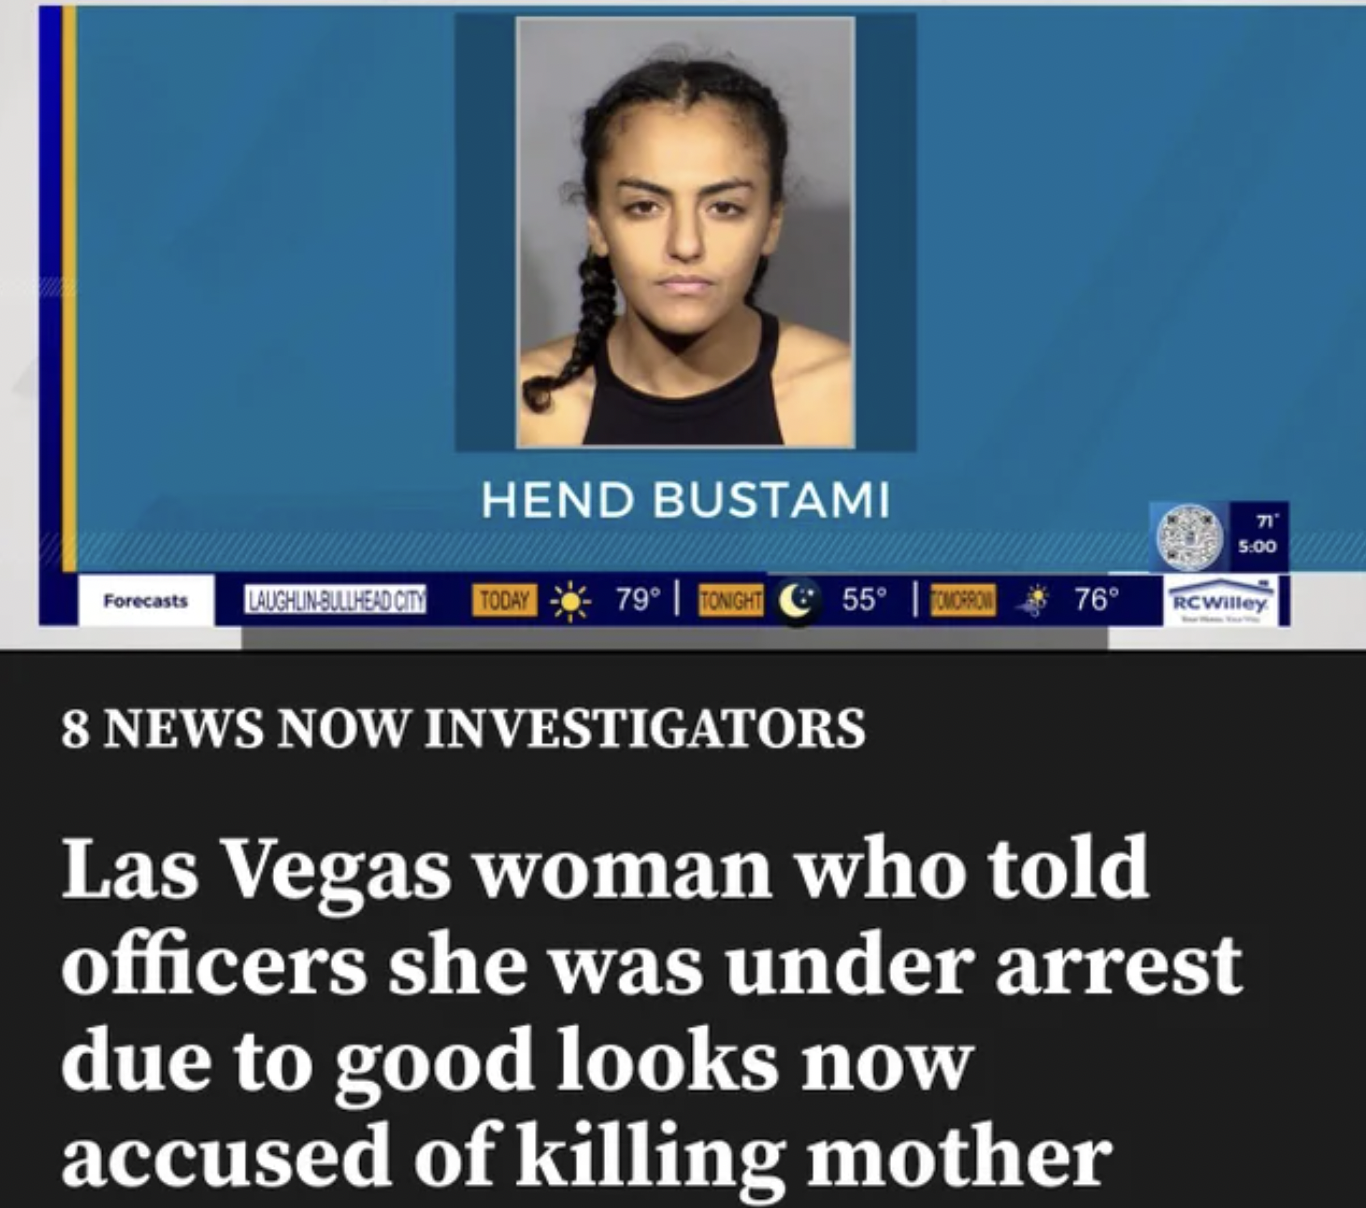 Funny facepalms - close and your enemies closer -  who told officers she was under arrest due to good looks now accused of killing mother 76 RCWilley